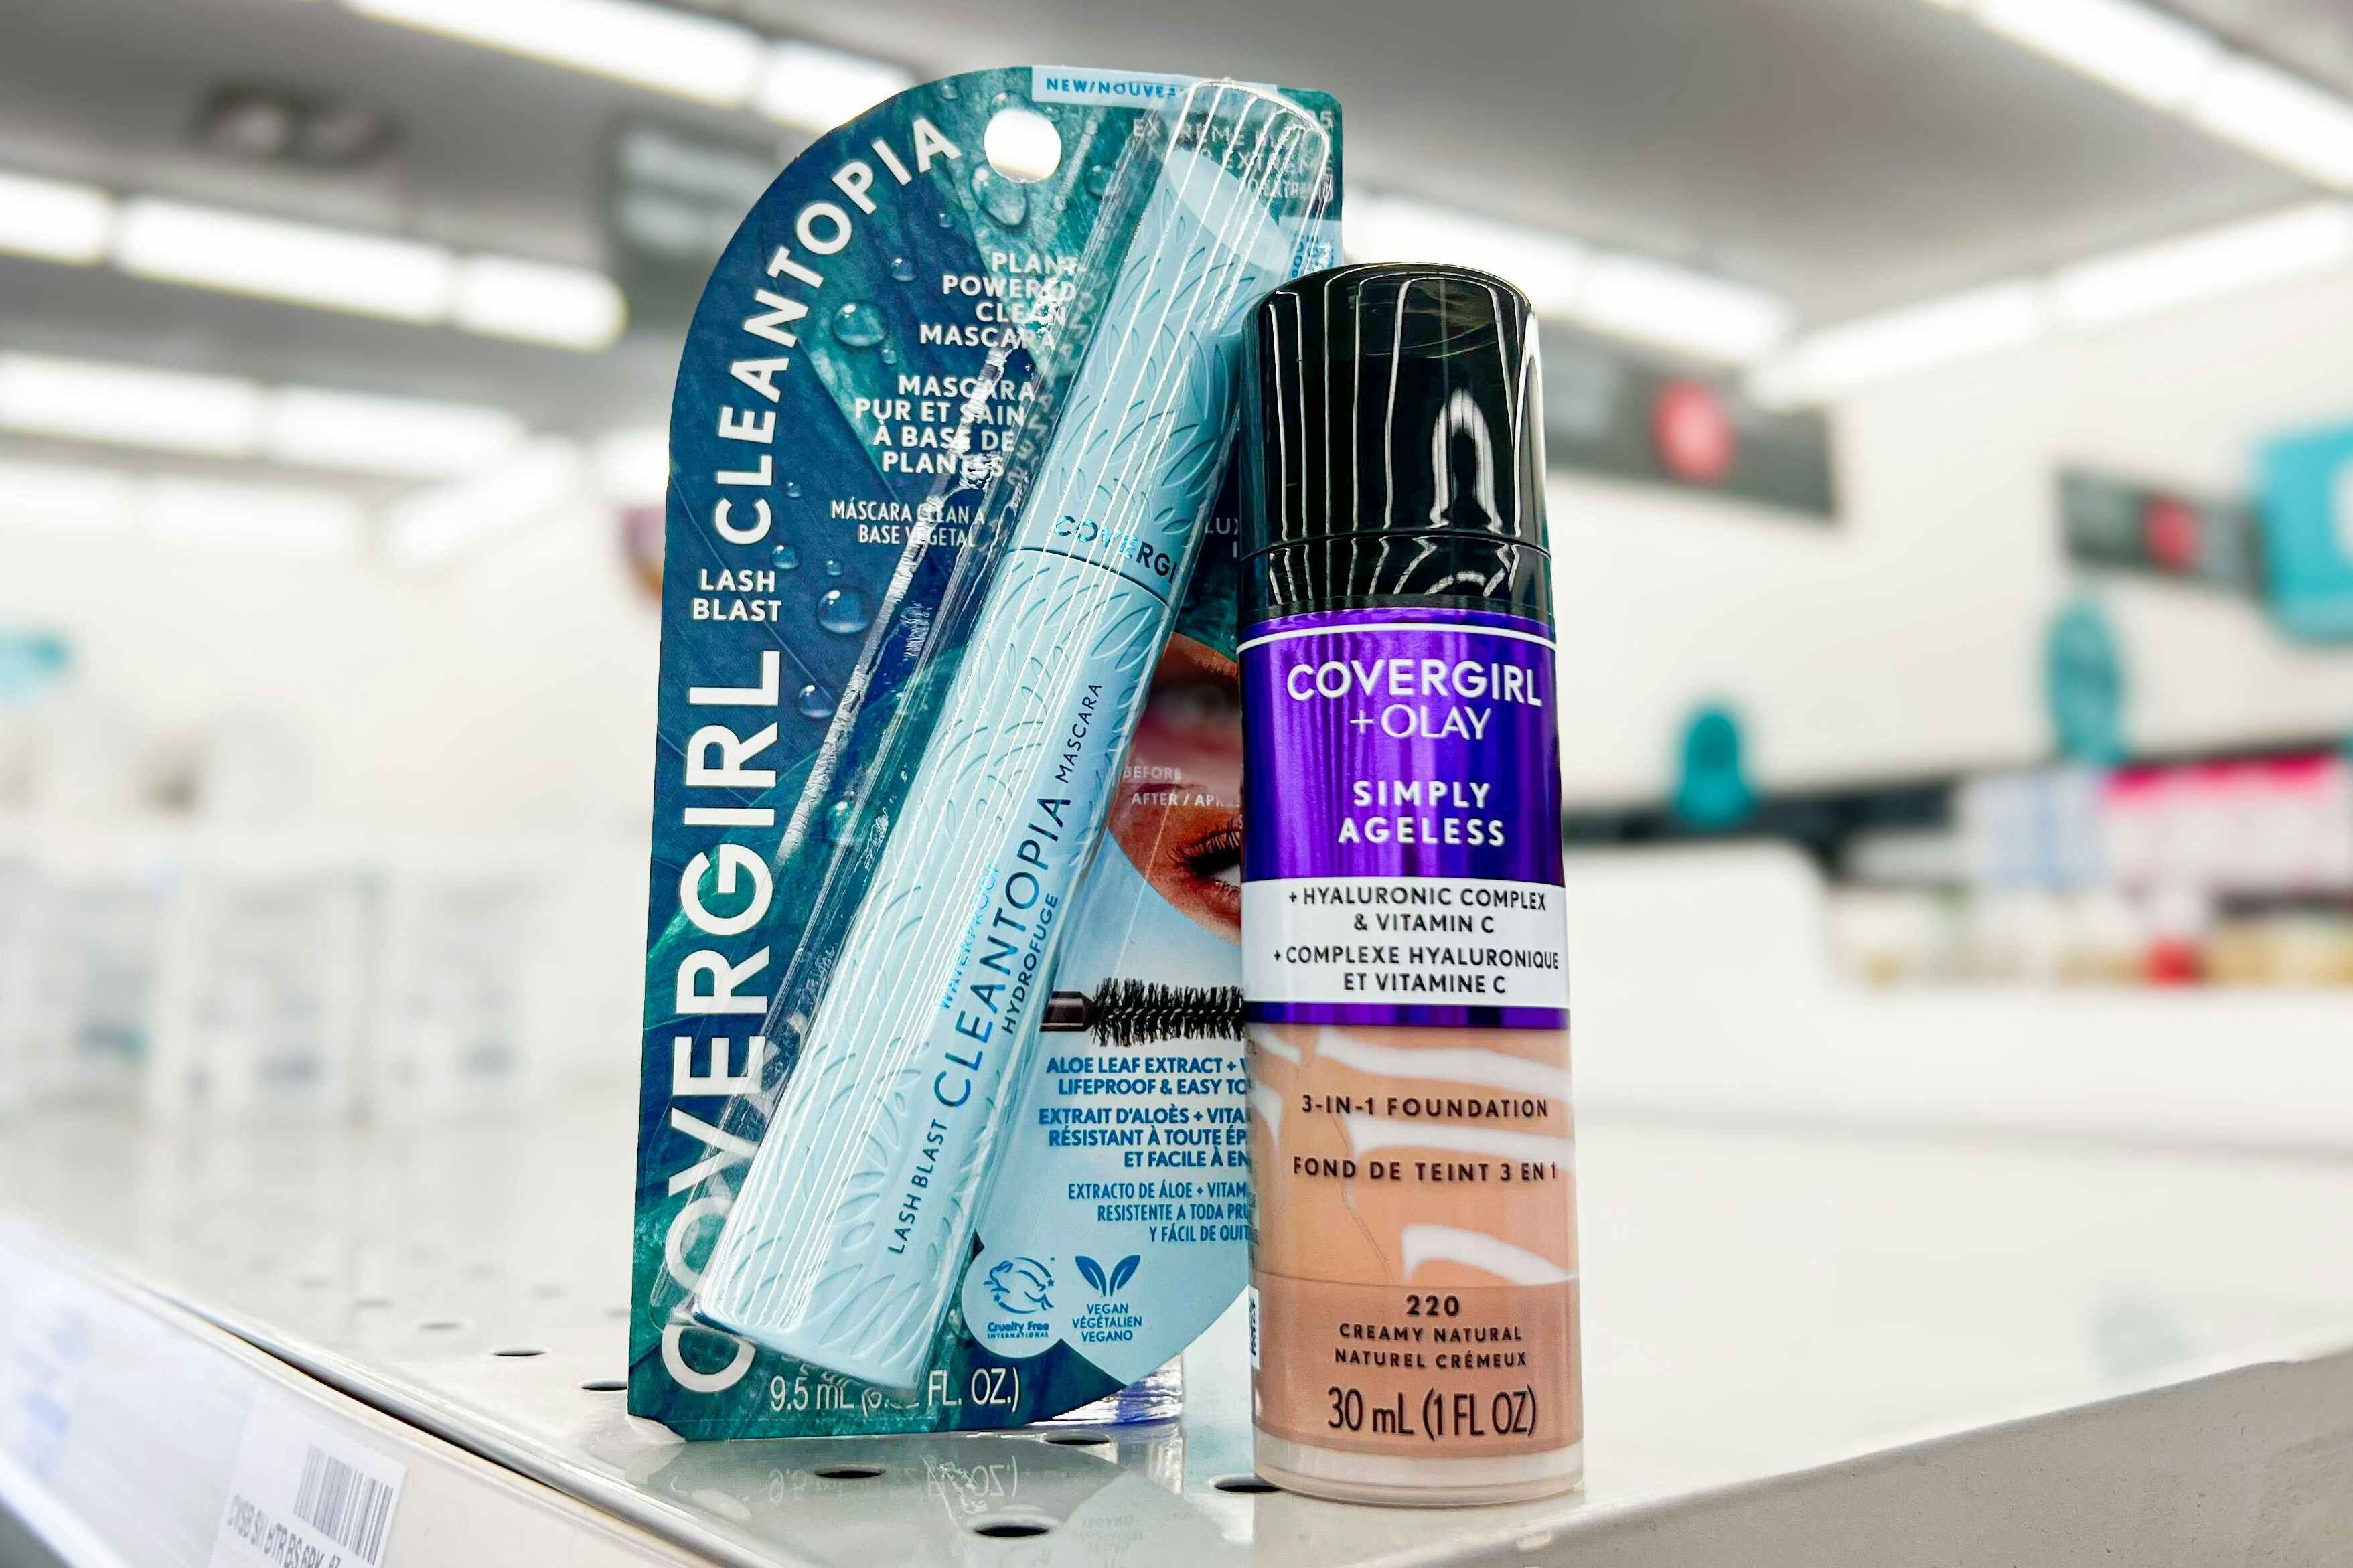 Save Up to 59% on Covergirl Cosmetics at CVS